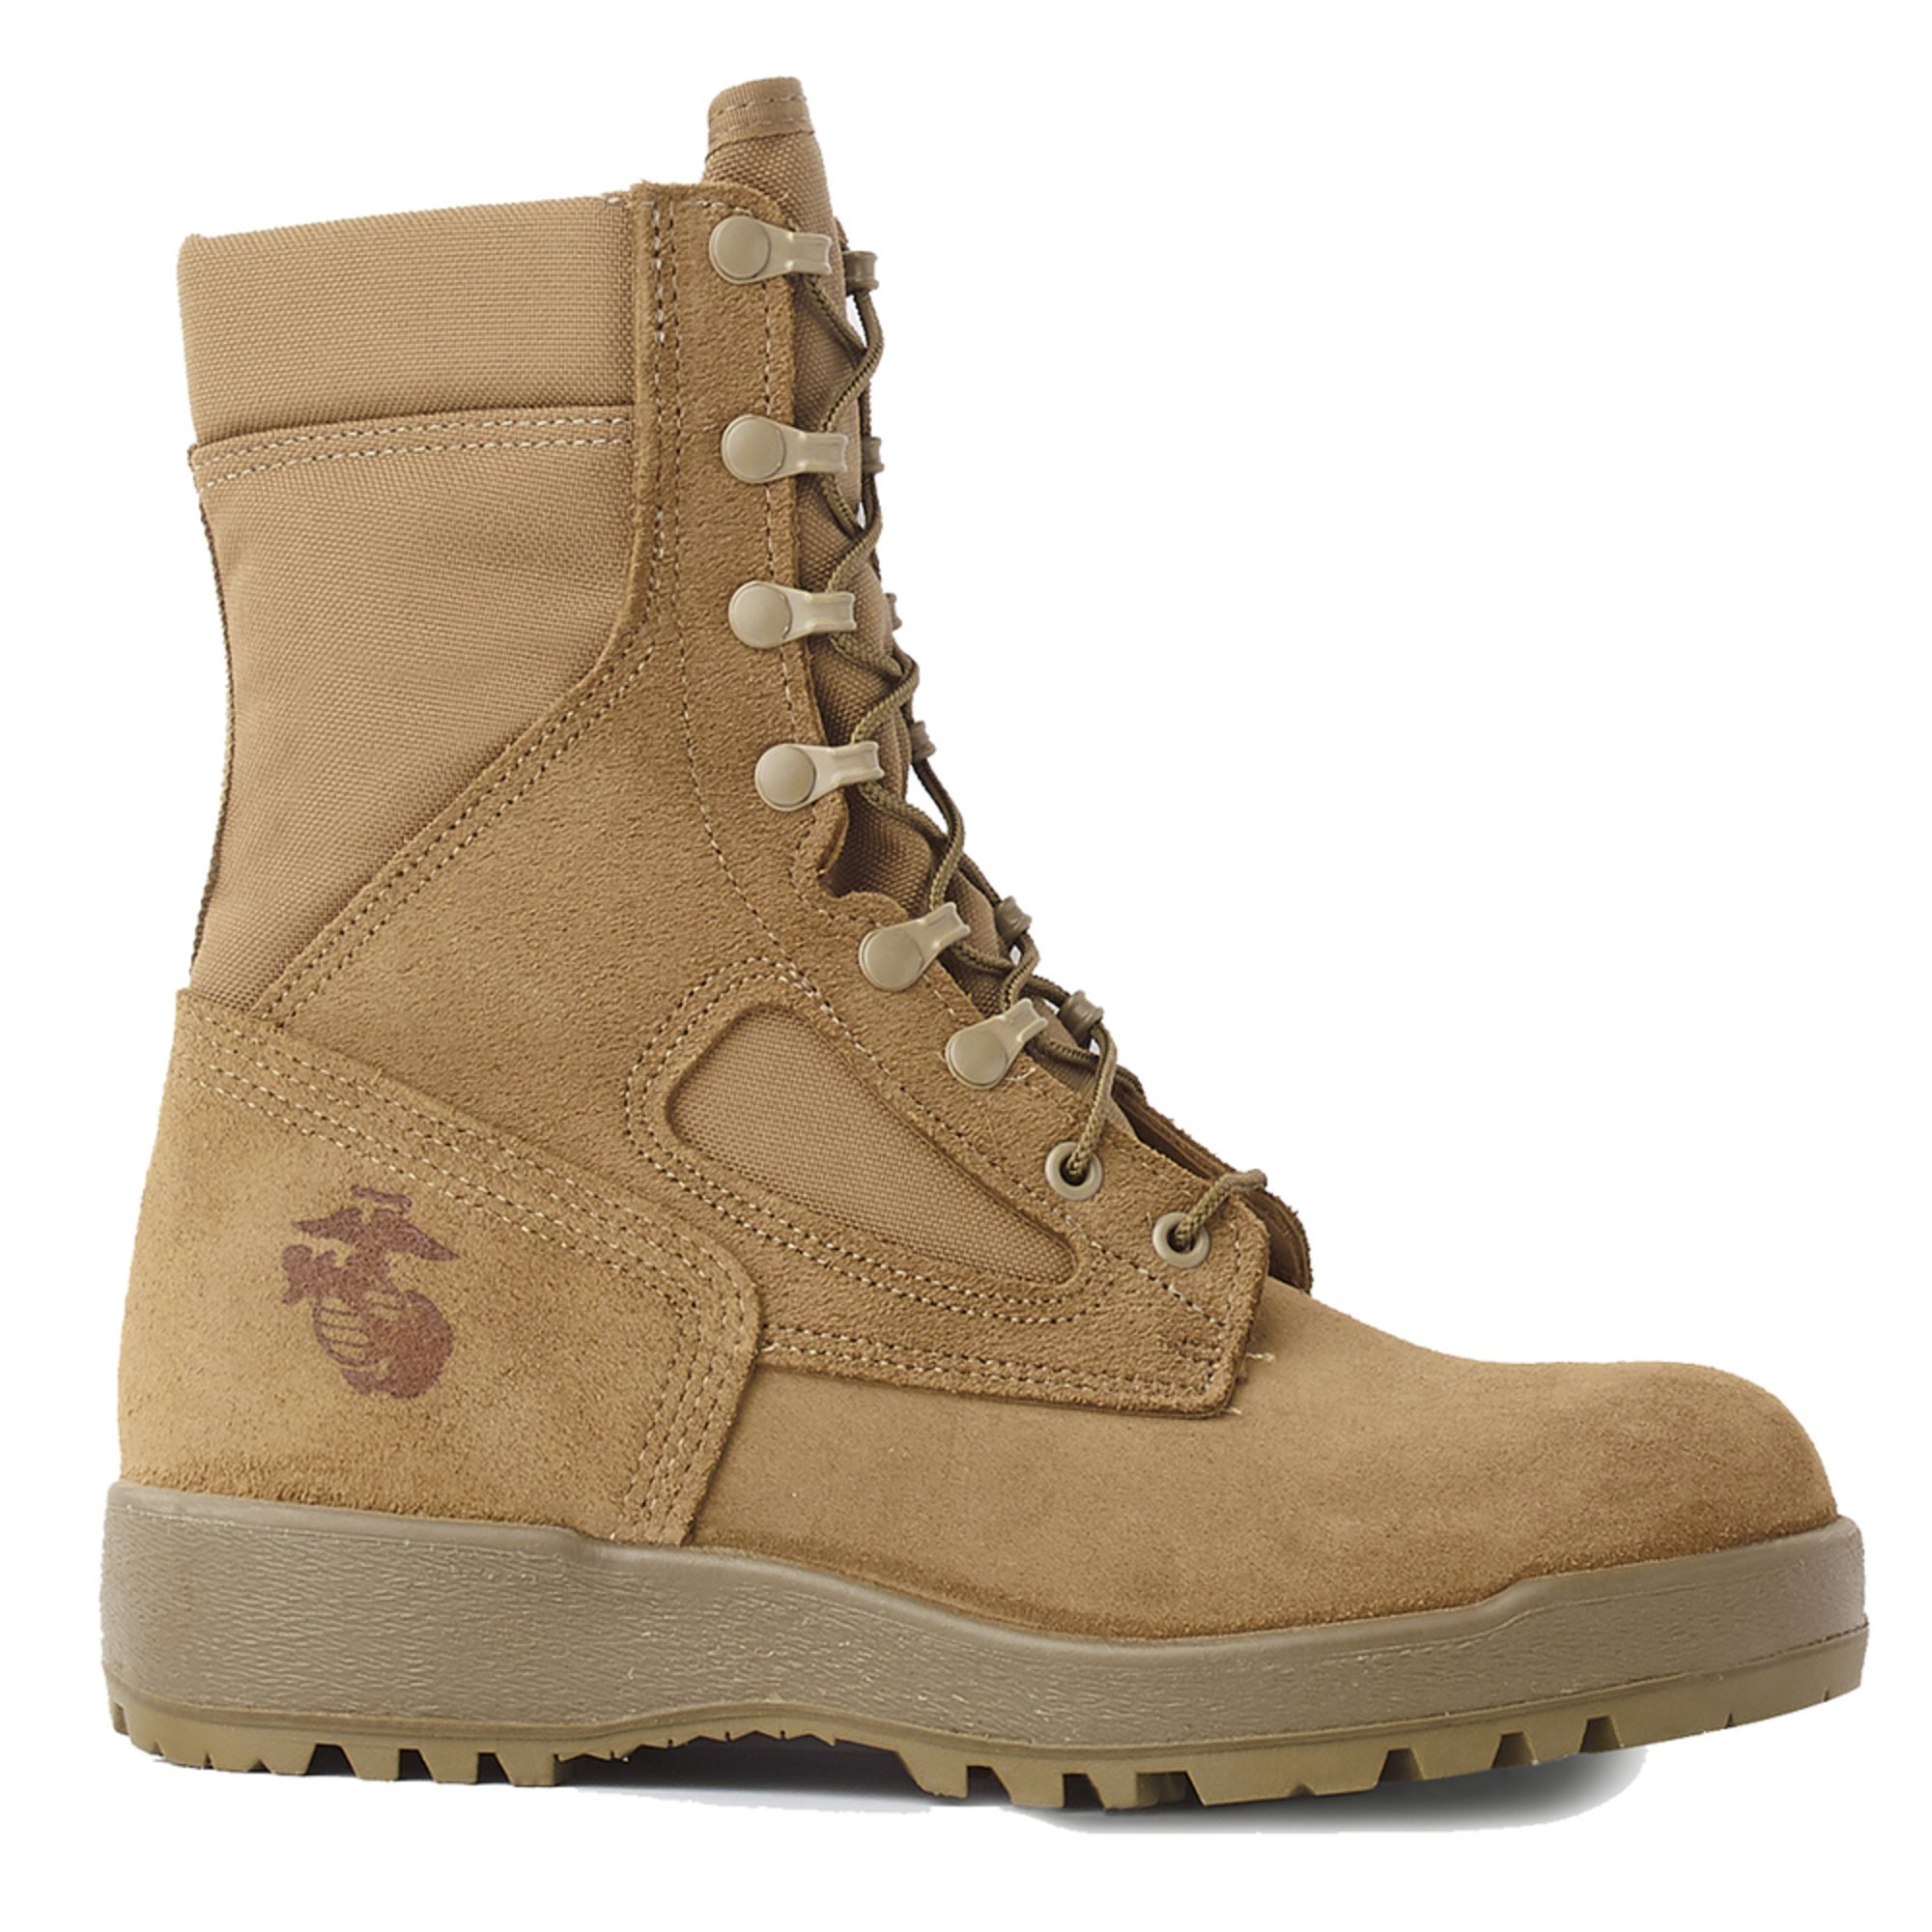 Usmc Hot Weather Non-steel Toe Boots | Woodland Marpat | Military ...